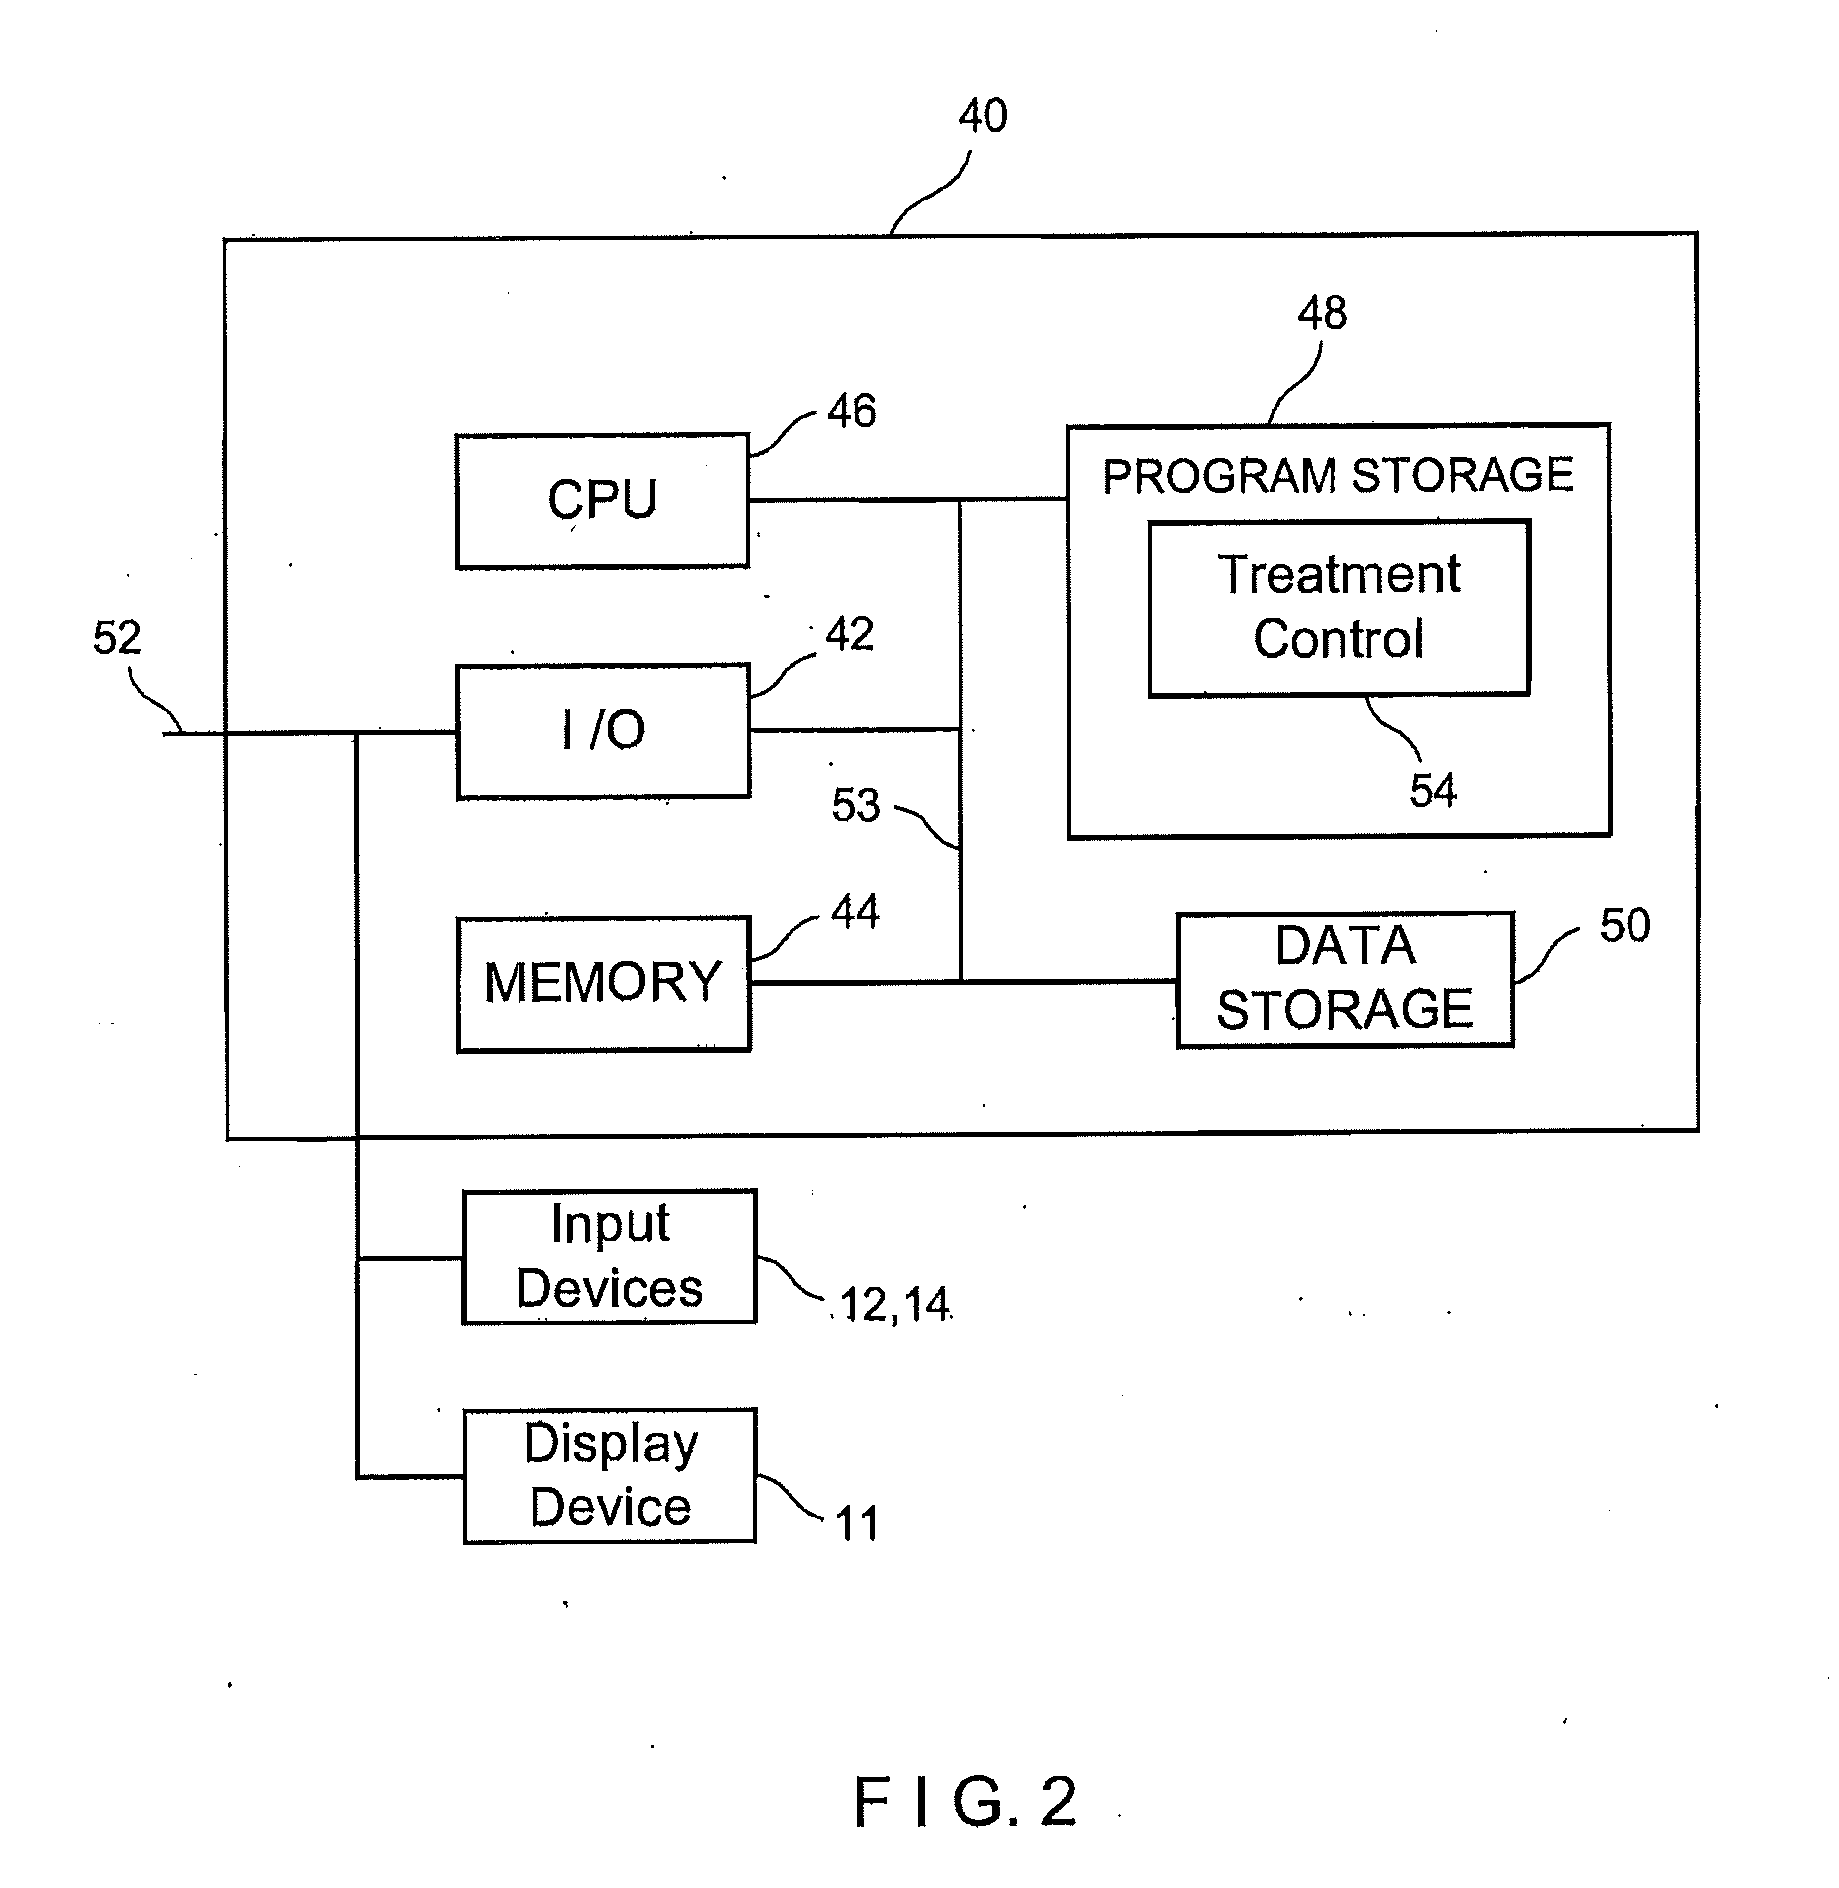 System and Method for Estimating A Treatment Region for a Medical Treatment Device